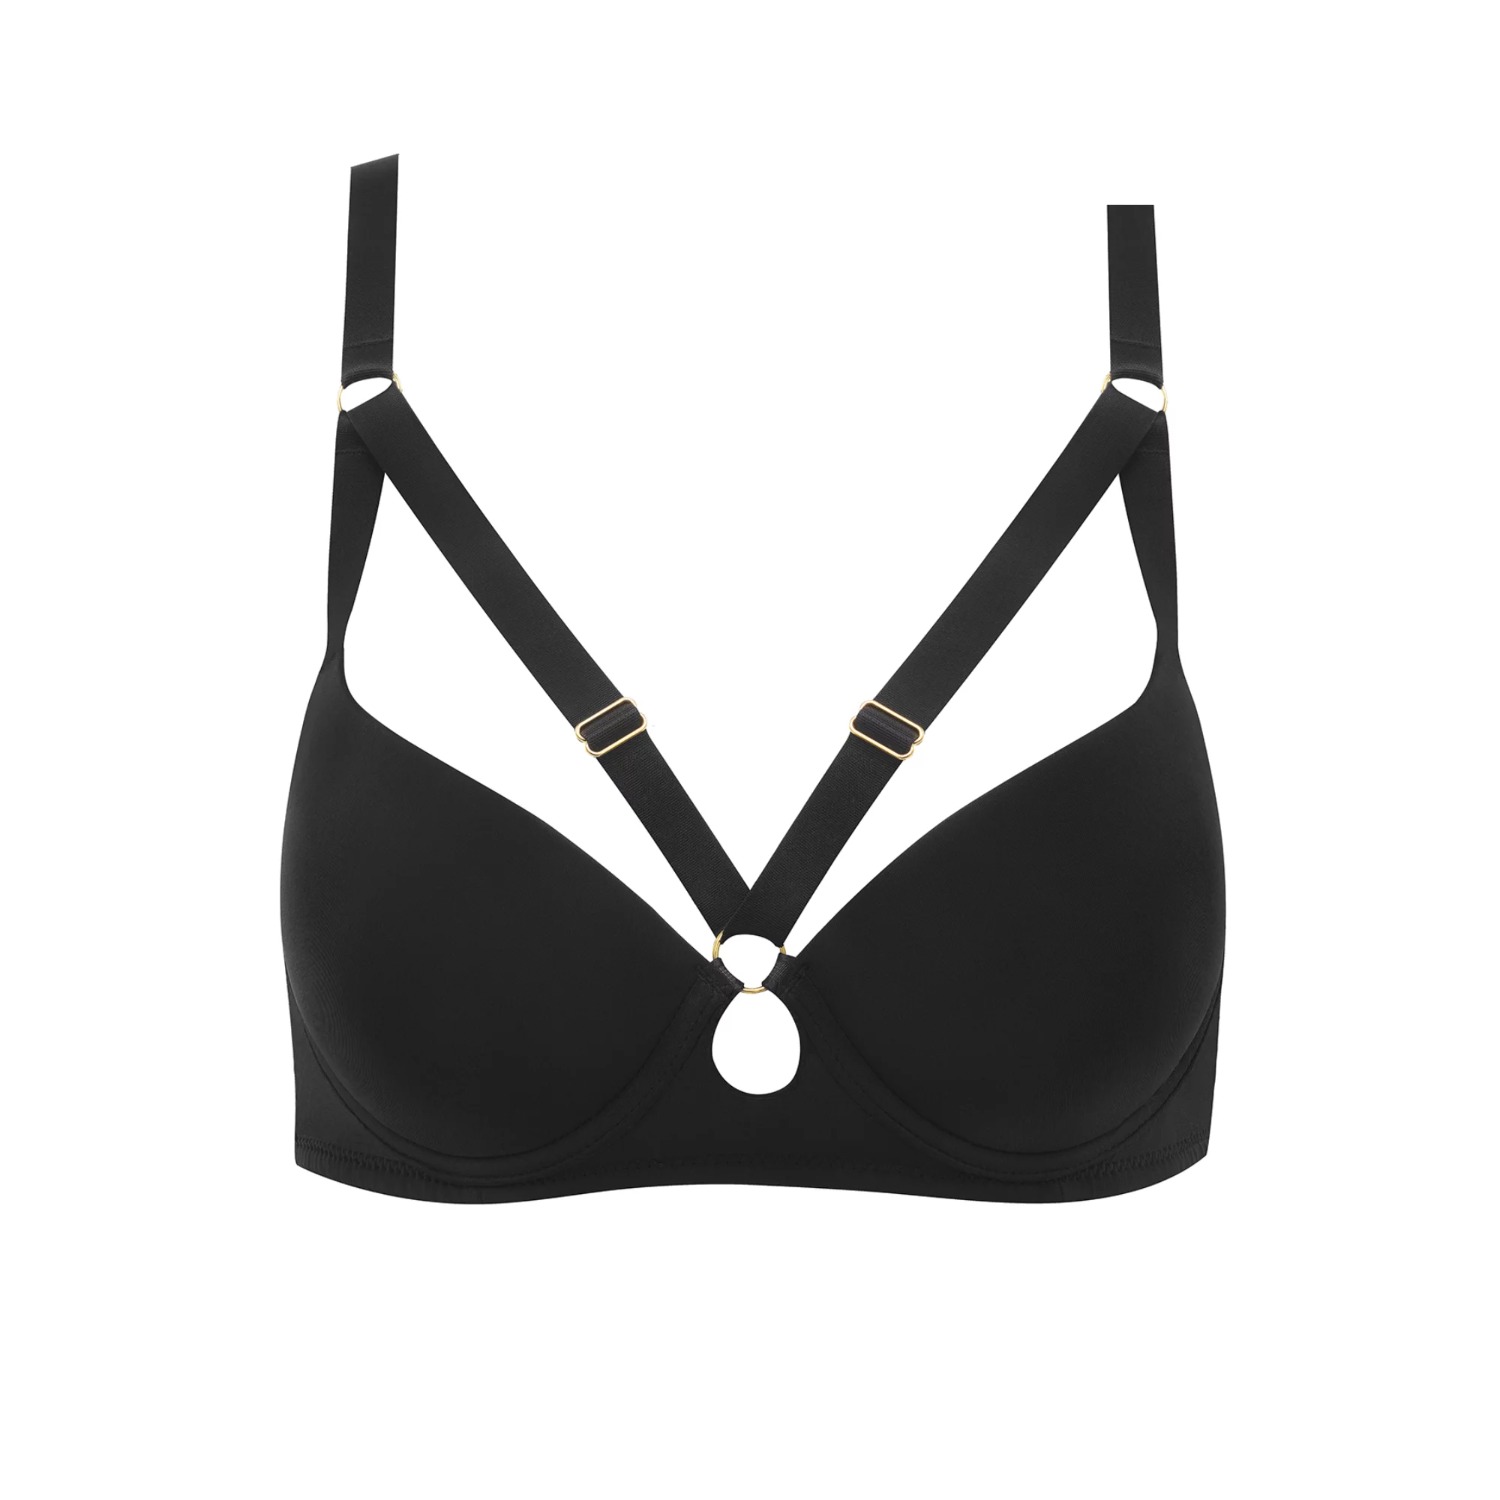 Maison Close Tapage Nocturne Black Quarter Cup Bra at the Hosiery Box - The  Hosiery Box